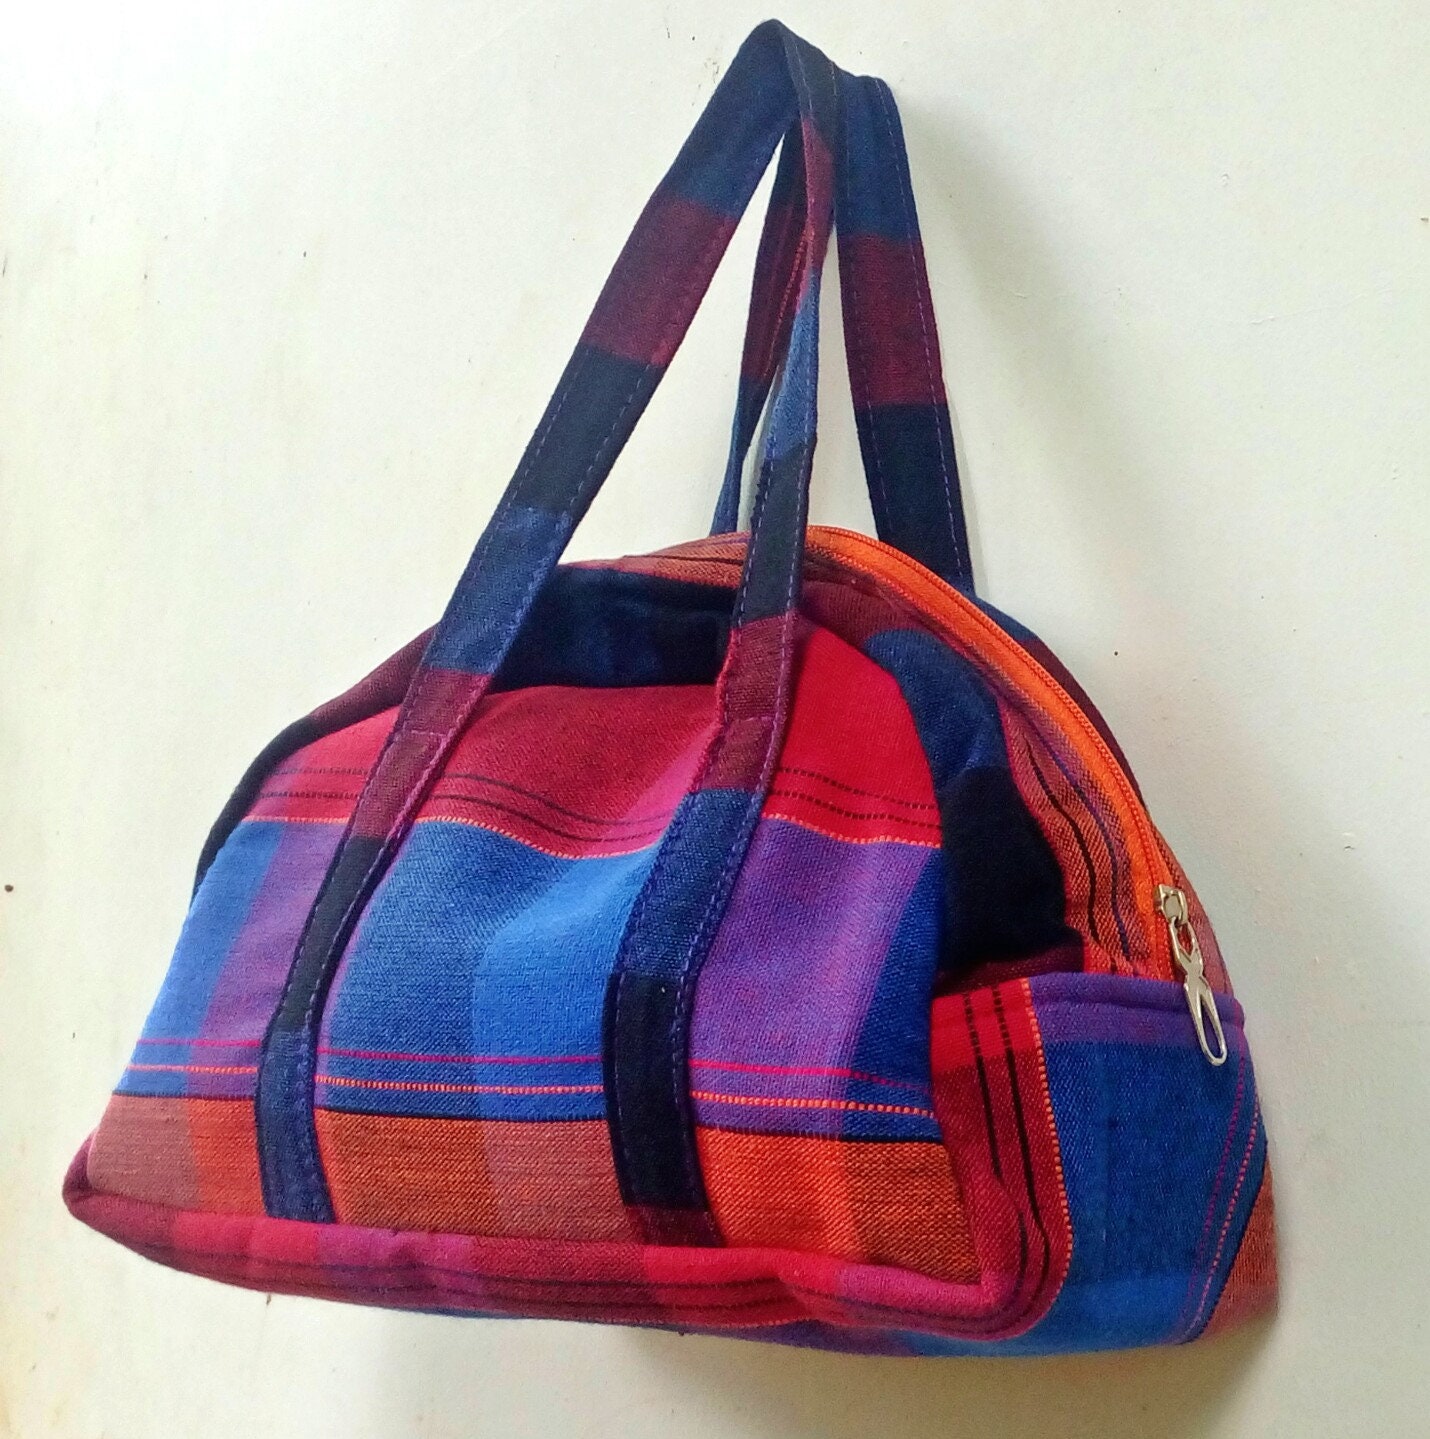 Handloom Hand bags High quality Handmade Simple & cute get 5% discount for  two! | eBay